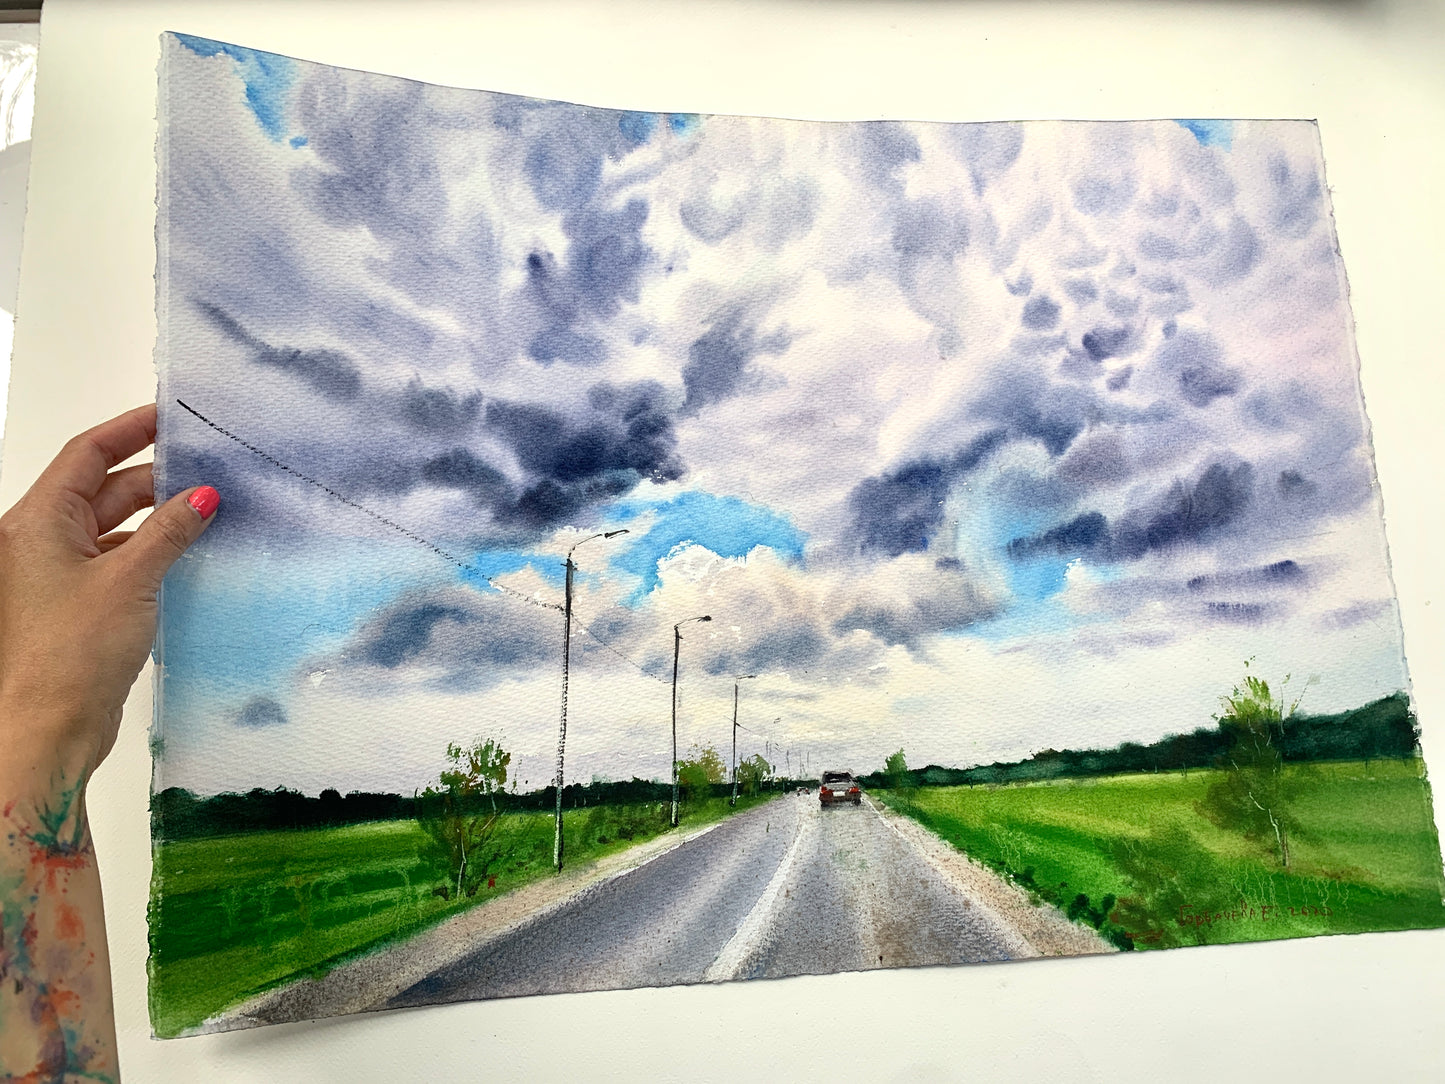 Rural Landscape Original Watercolor Painting - Road and clouds #2 - 16x22 in